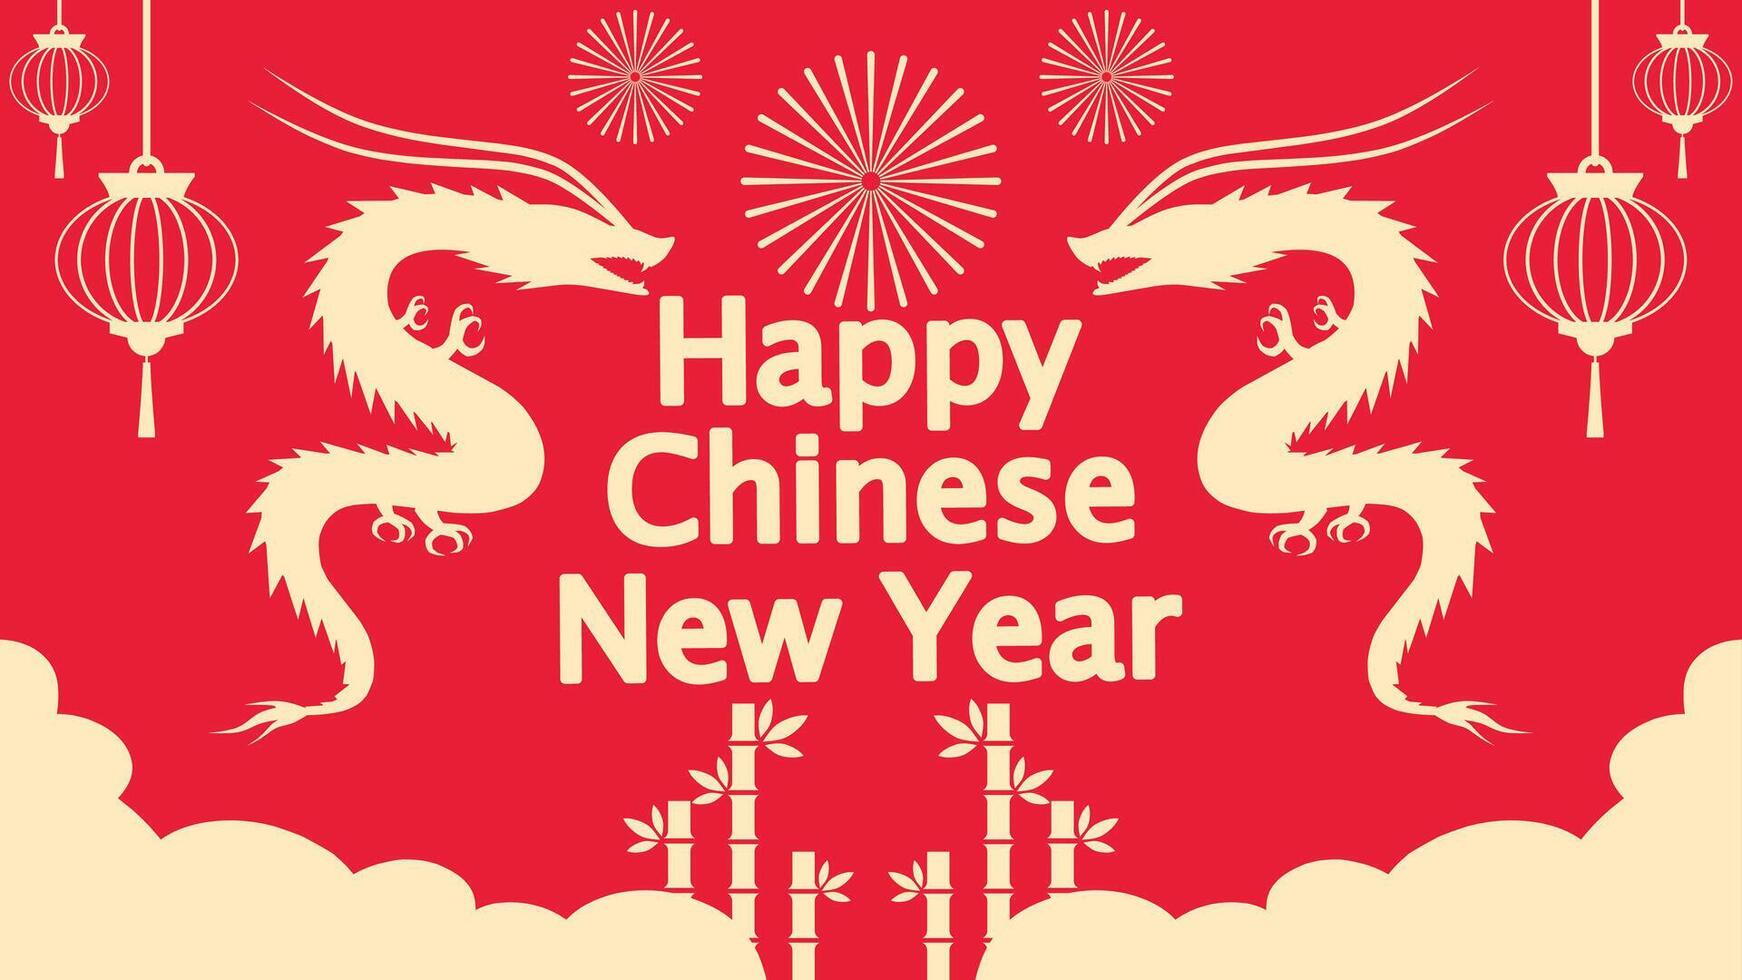 Chinese new year celebration vector background. Year of the dragon vector background for event or festival. Happy chinese new year vector design for celebration event. Lunar festival event greeting